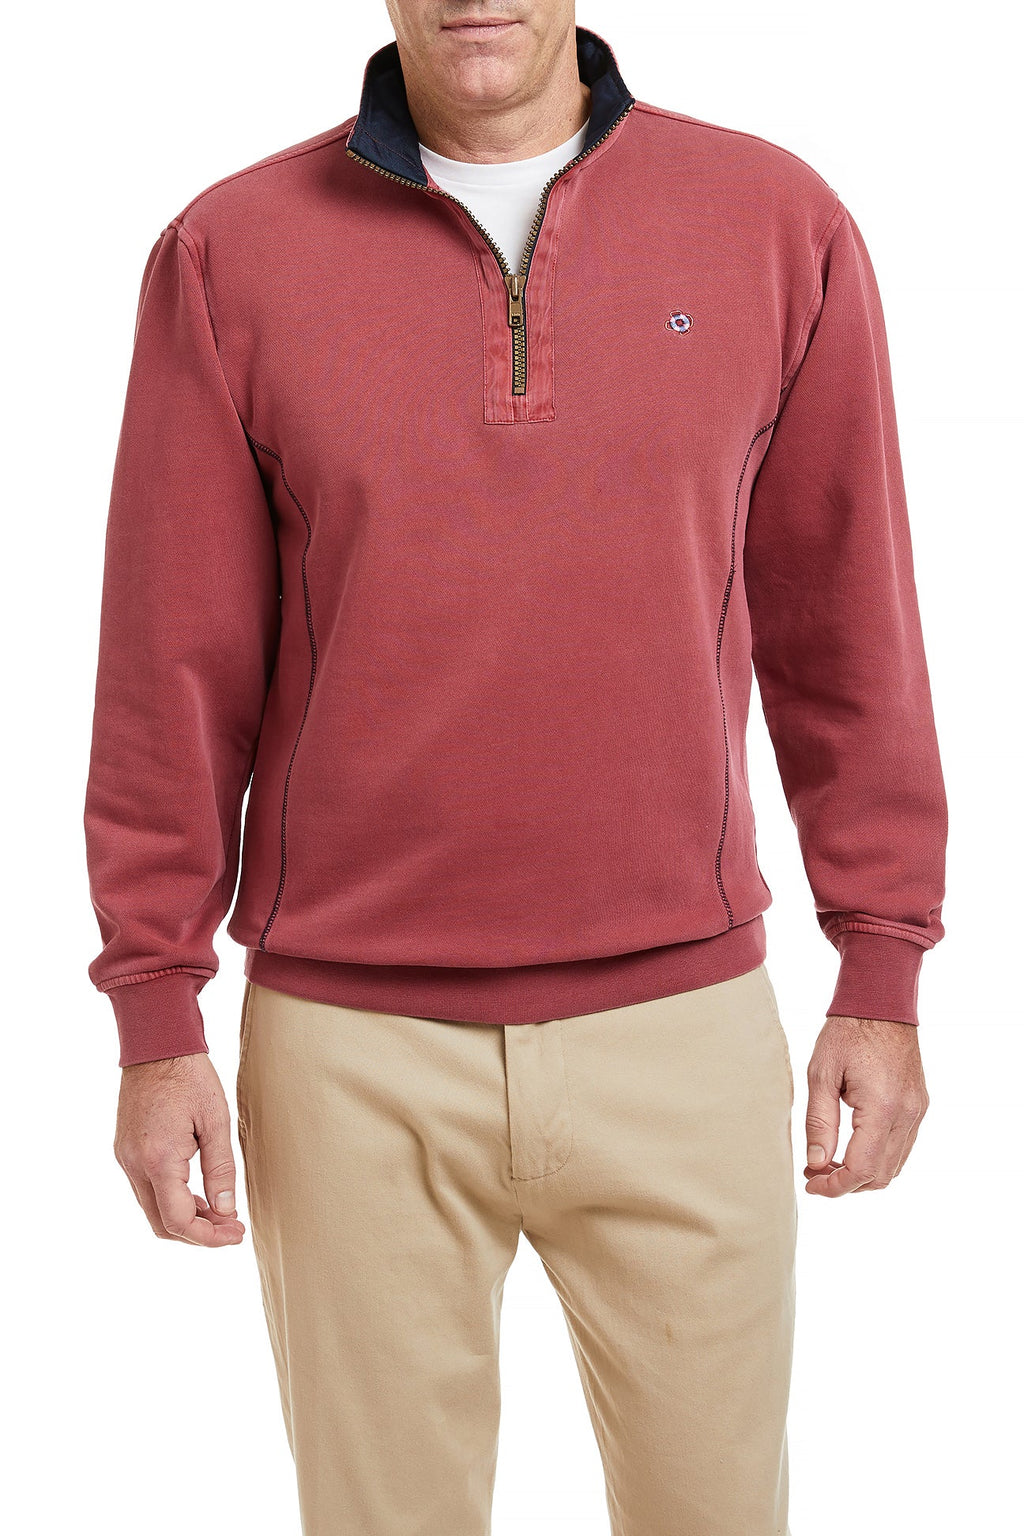 Breakwater Quarterzip Weathered Red MENS OUTERWEAR Castaway Clothing